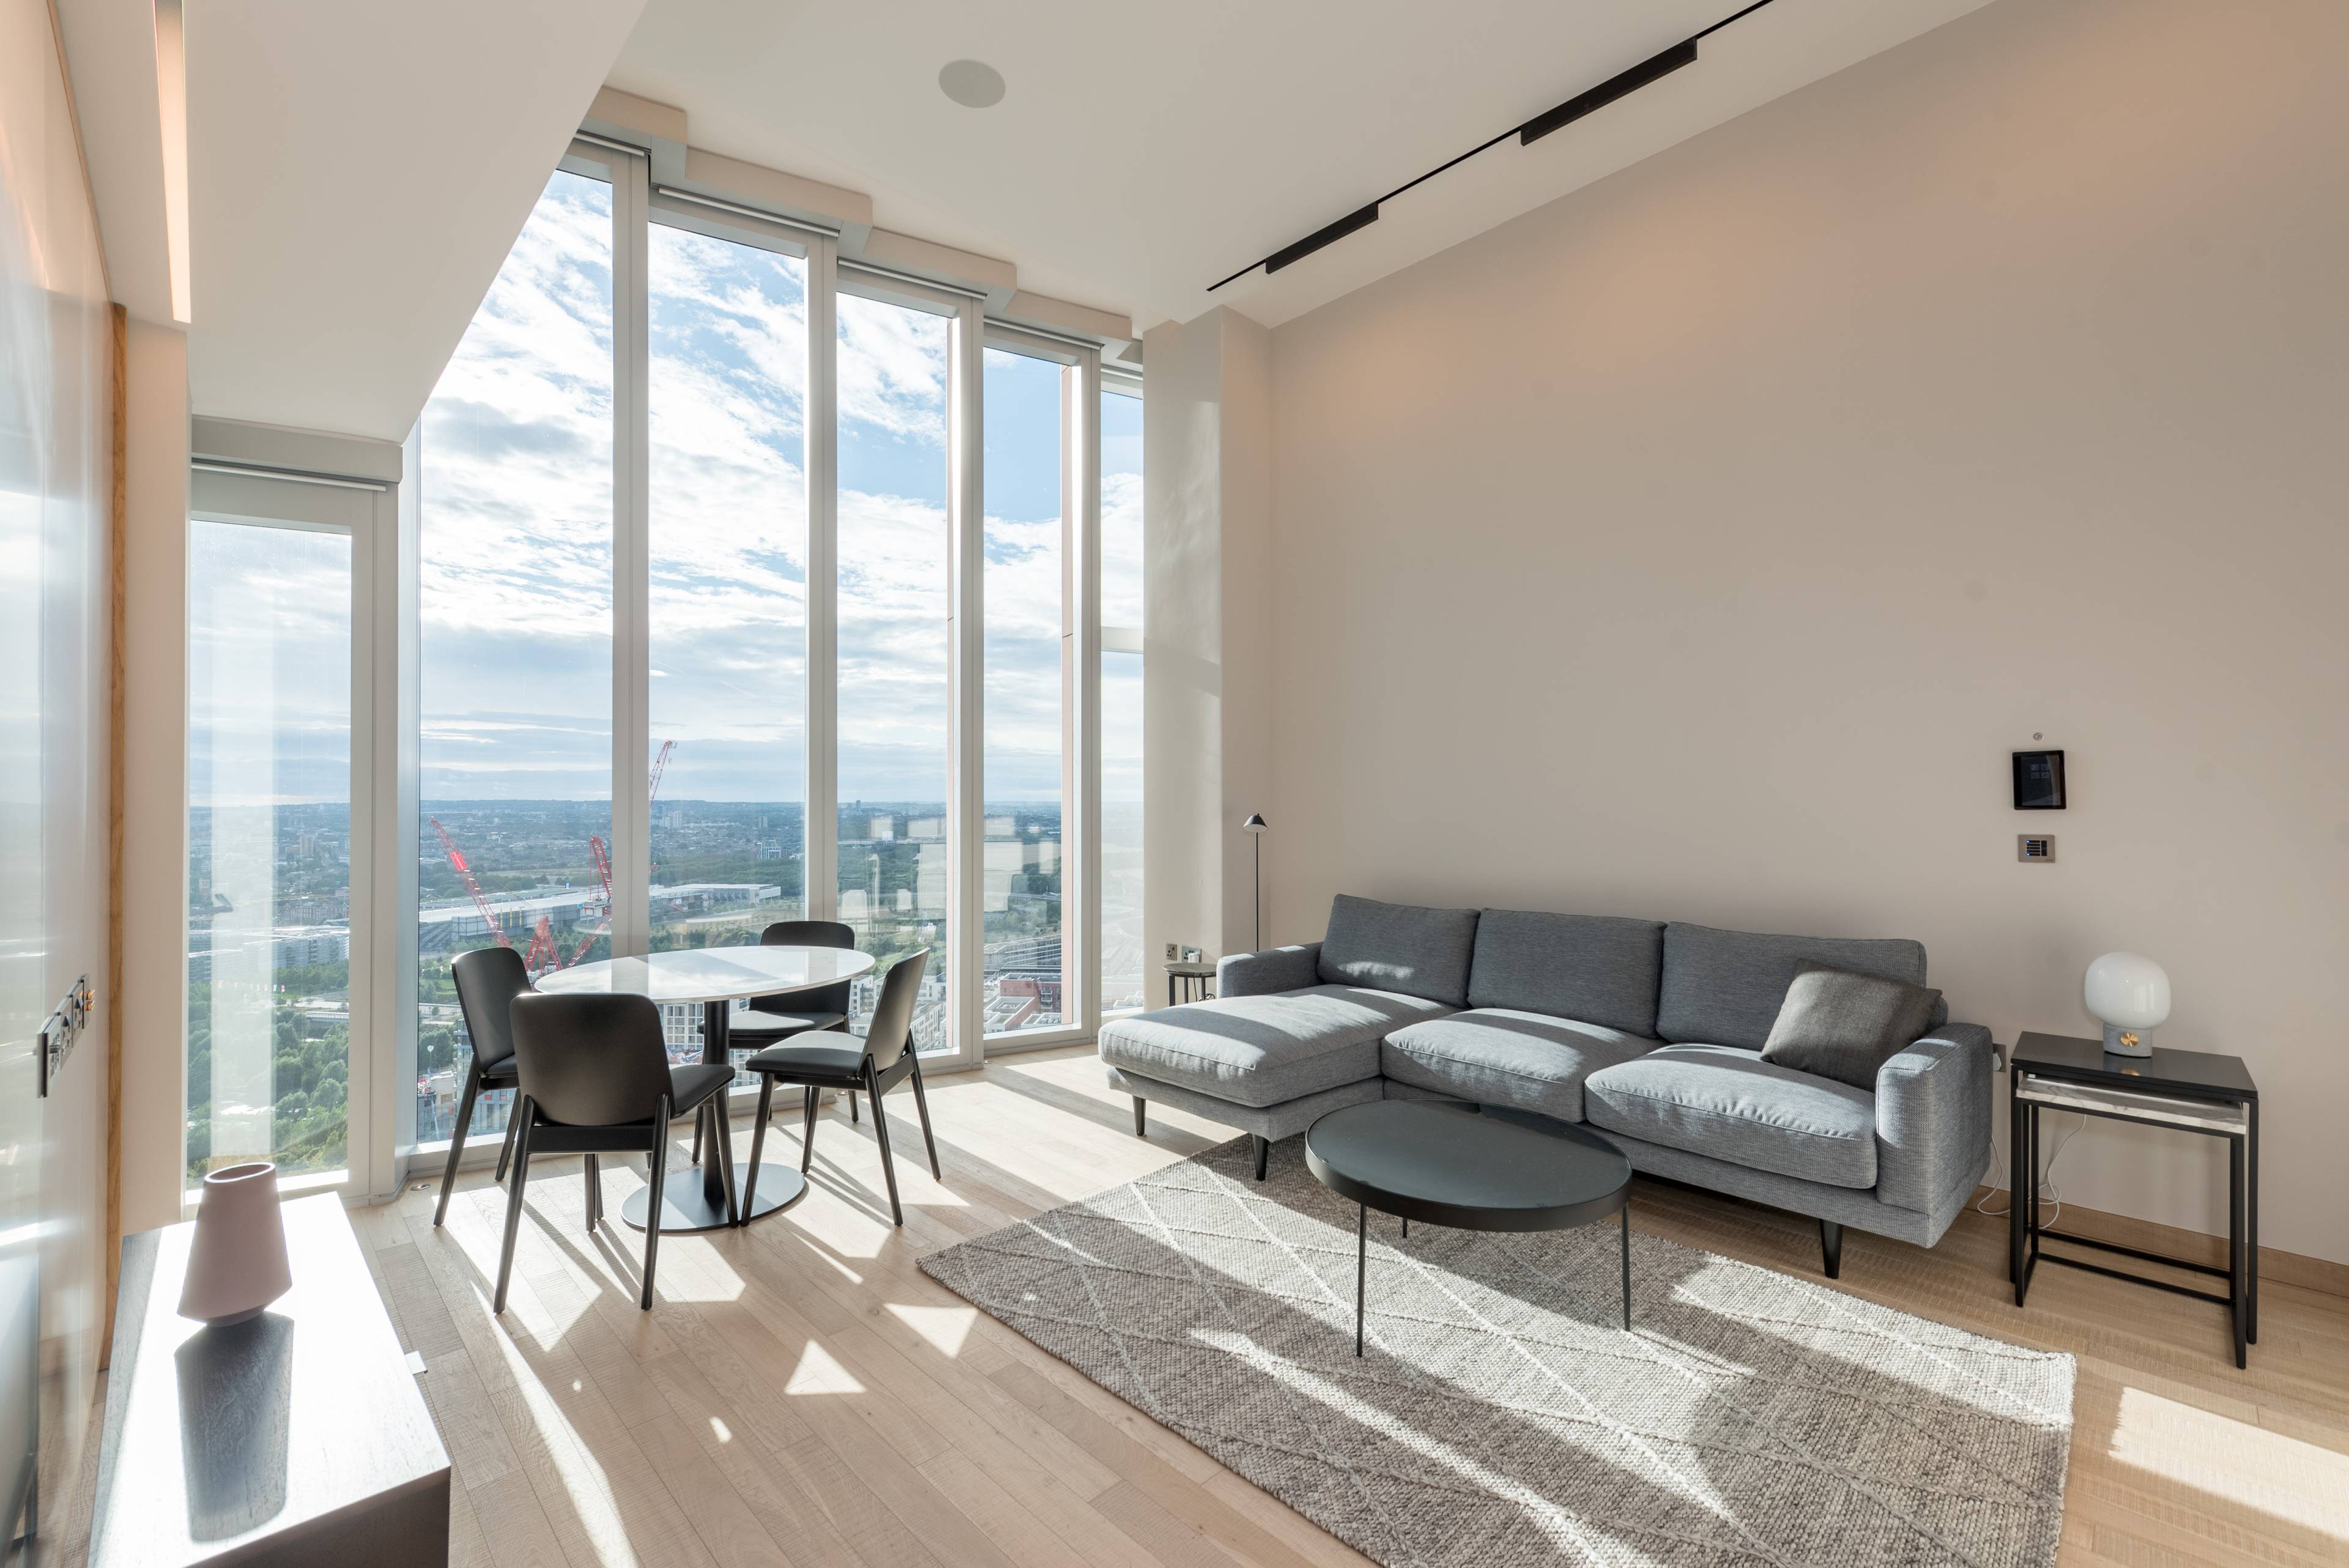 Live in this modern 1 bedroom with spectacular south facing views